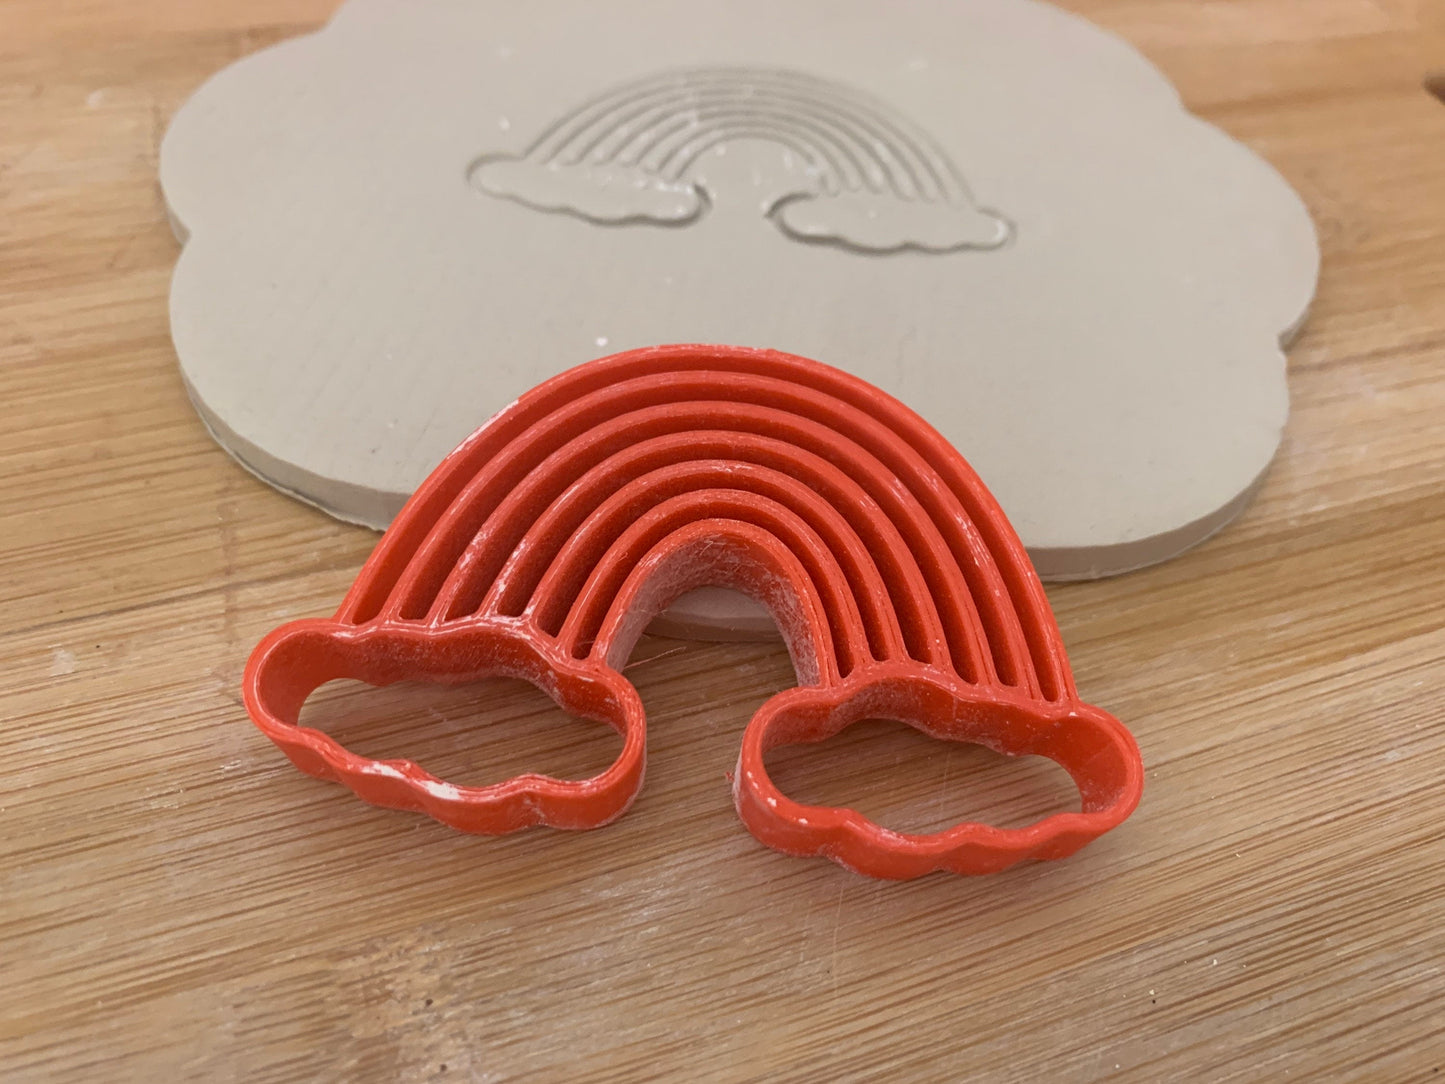 Rainbow design, Pottery Stamp or Stencil/ optional cutter - plastic 3D printed, multiple sizes